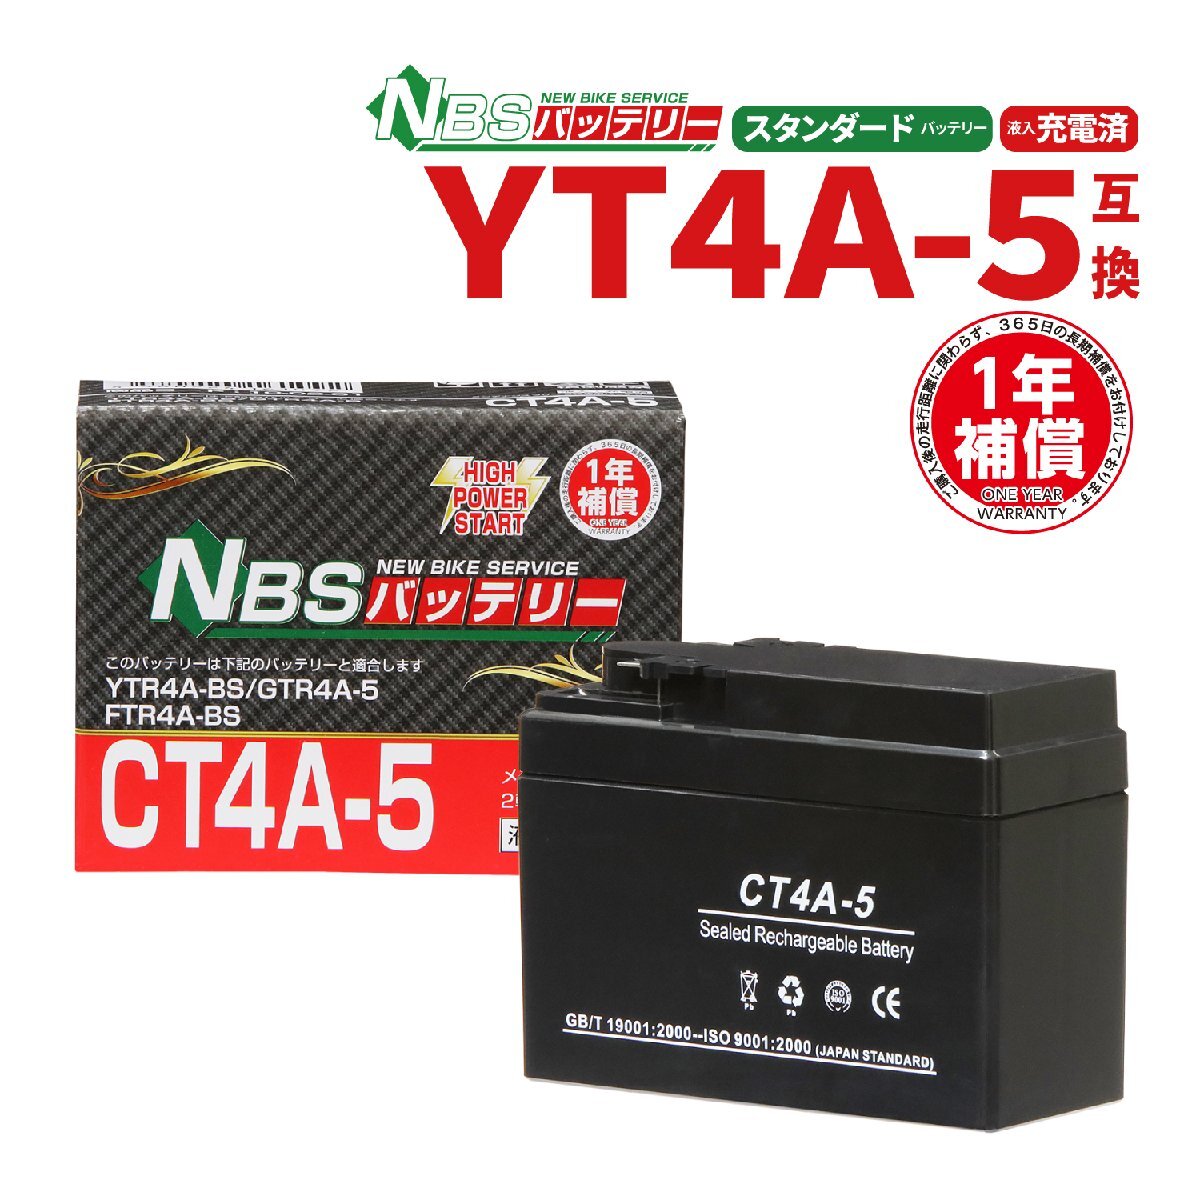 YTR4A-BS互換 CT4A-BS バイクバッテリー ライブDio モンキー 1年間保証 新品 バイクパーツセンター 100201b_画像1